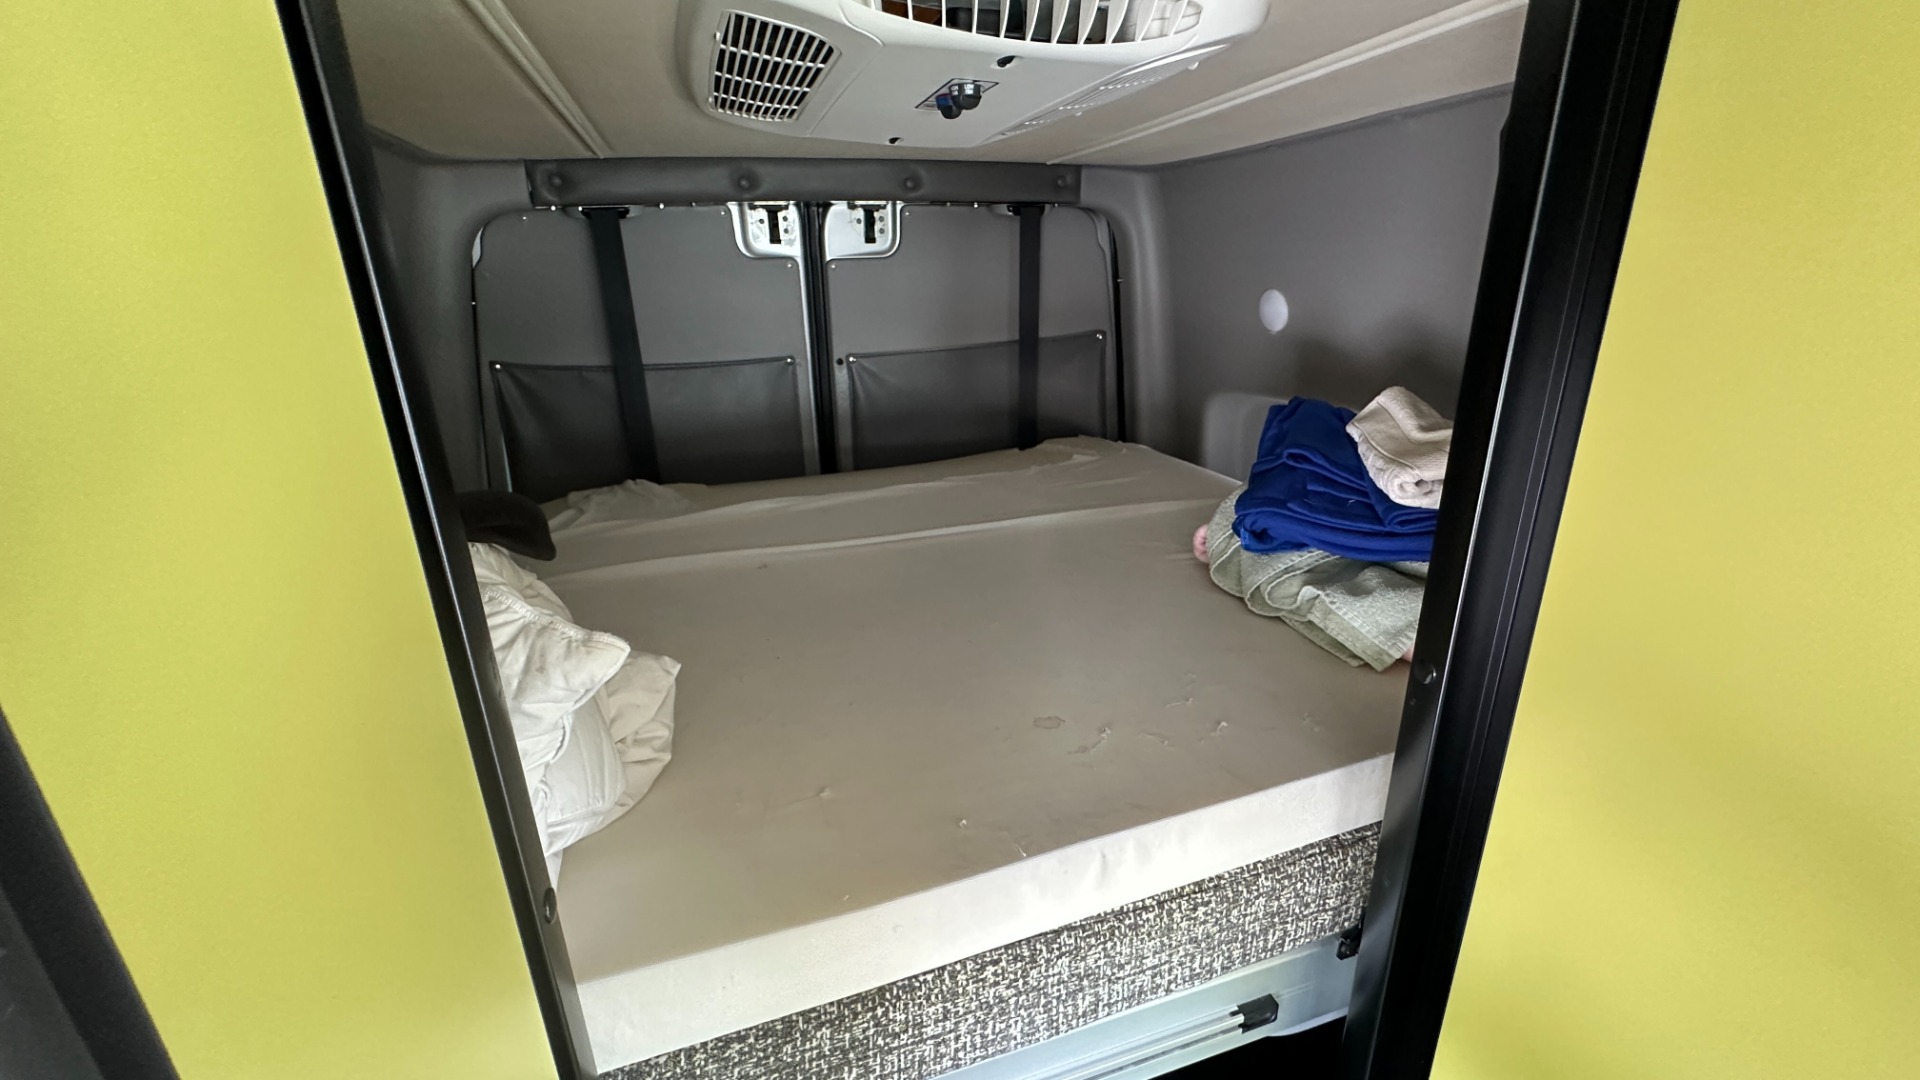 Used 2018 Mercedes-Benz Sprinter Winnebego OVERLANDER / CONVERSION SPRINTER / 4X4 / KITCHEN / BATHROOM / AIR / AWNING for sale $129,000 at Formula Imports in Charlotte NC 28227 84